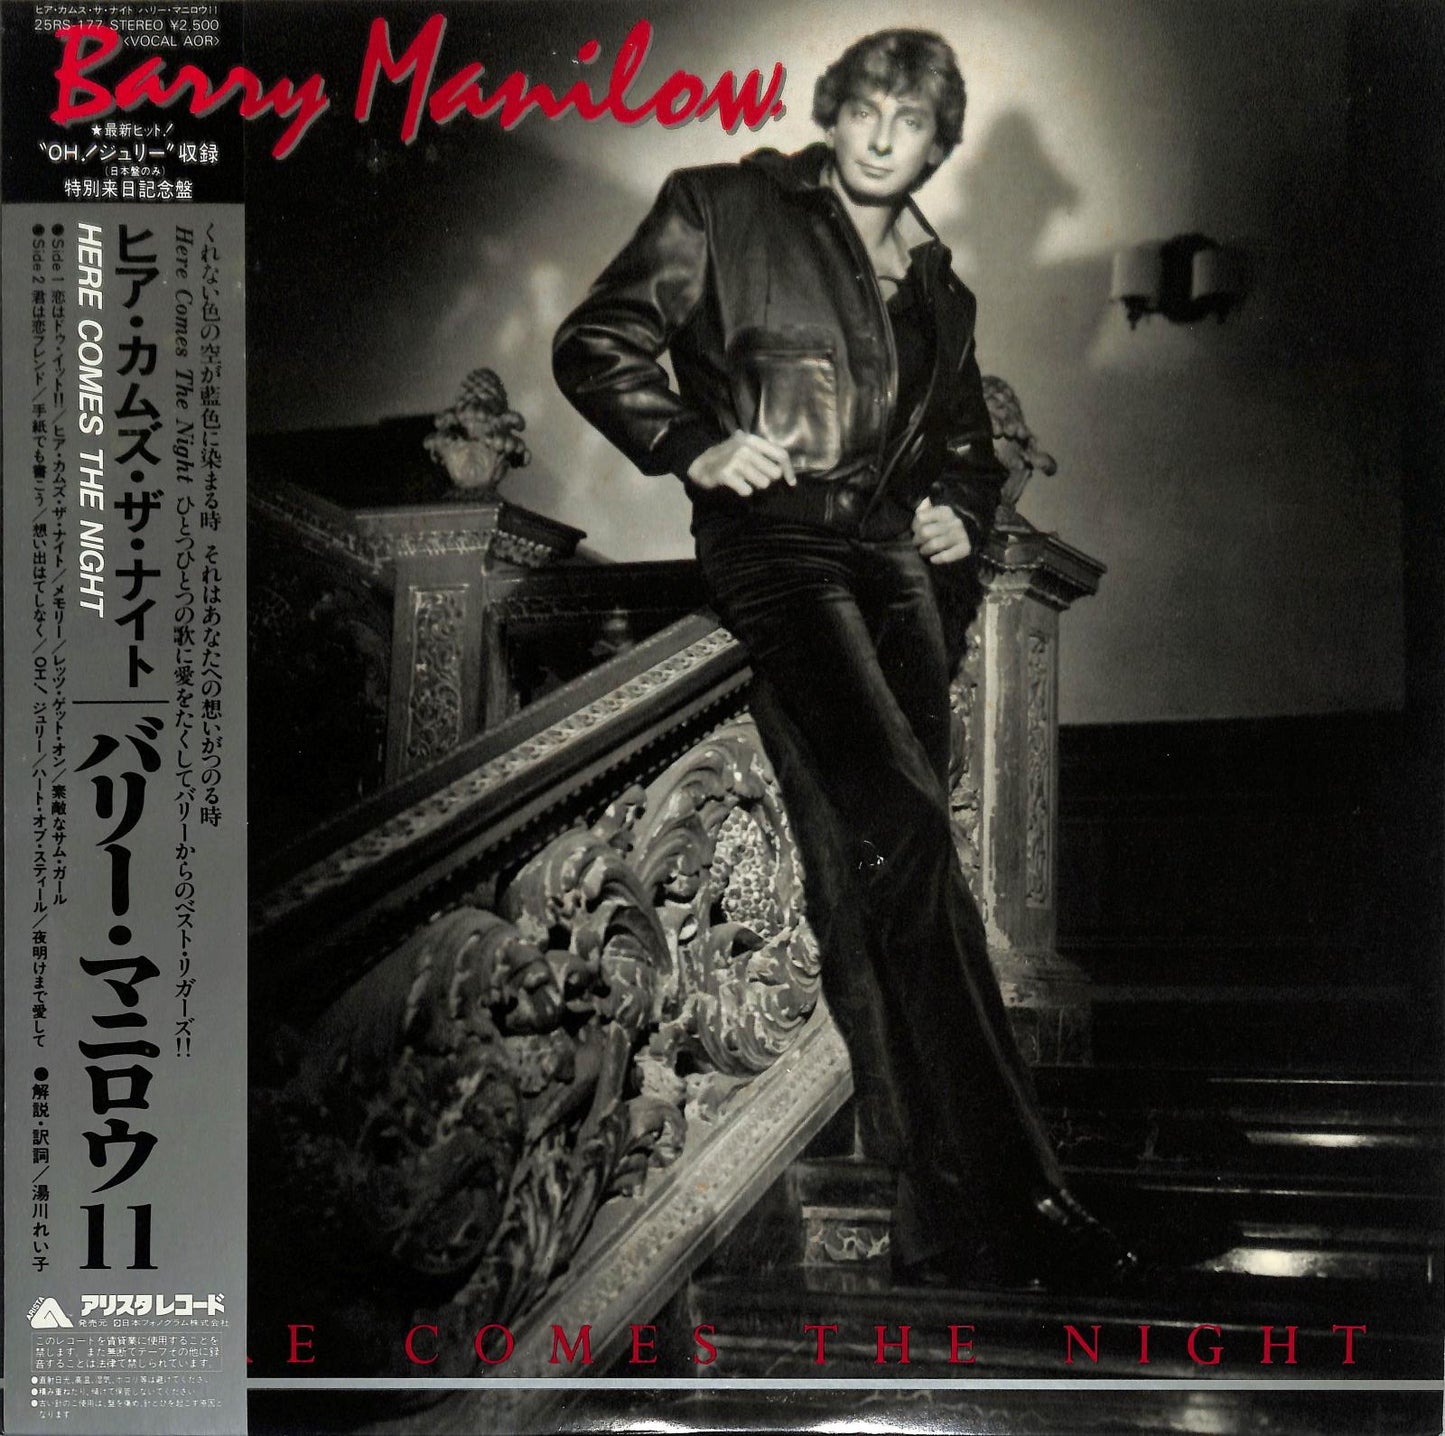 BARRY MANILOW - Here Comes The Night